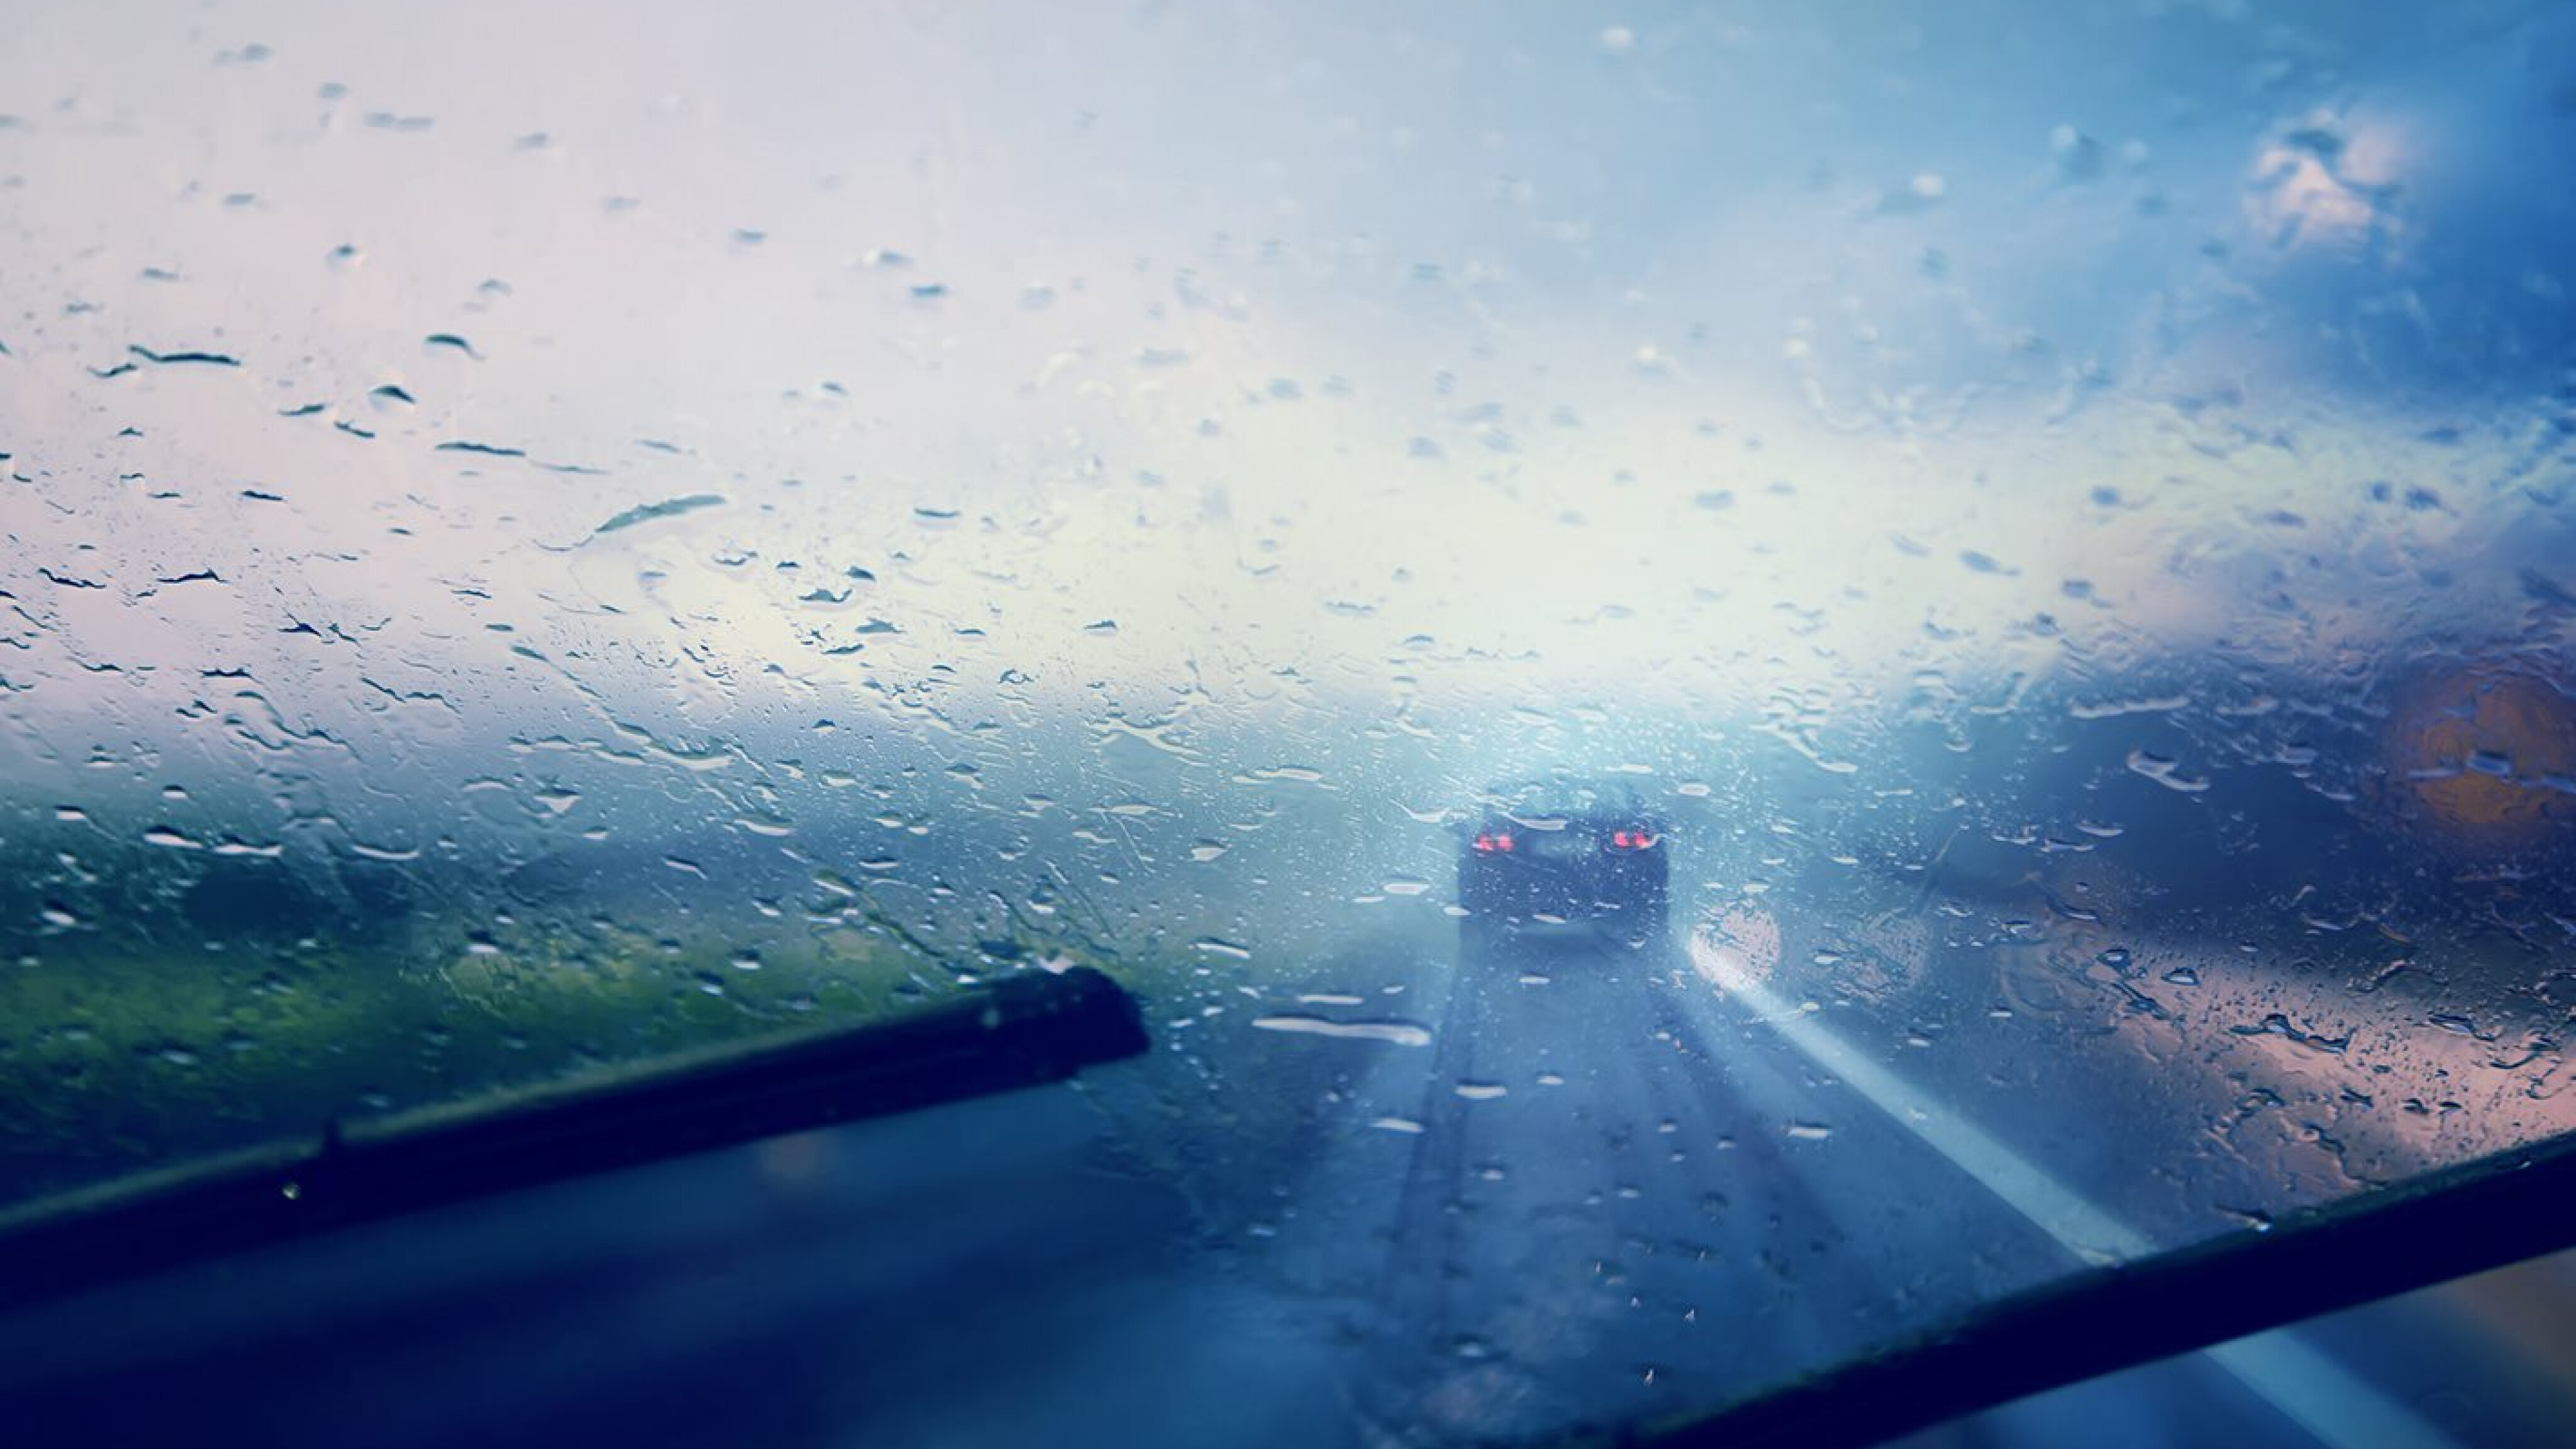 Prevent Your Windshield from Fogging in the Rain